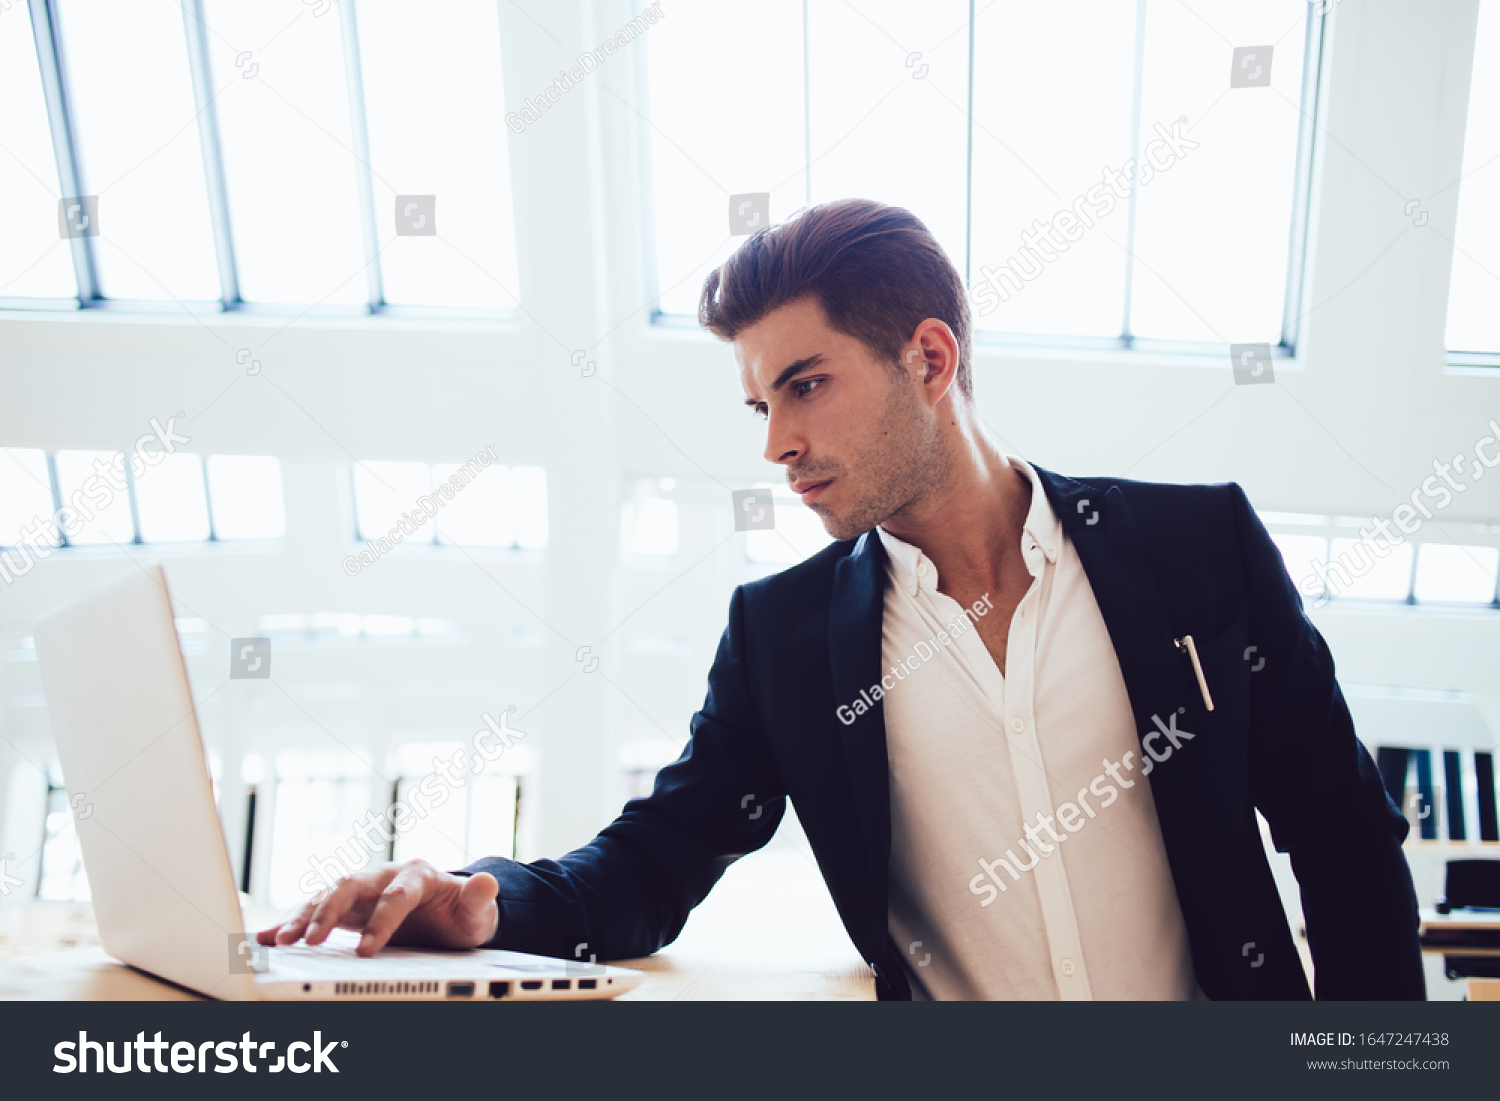 Concentrated youthful smart male freelancer focusing on laptop screen while typing and working on business project in light modern office #1647247438